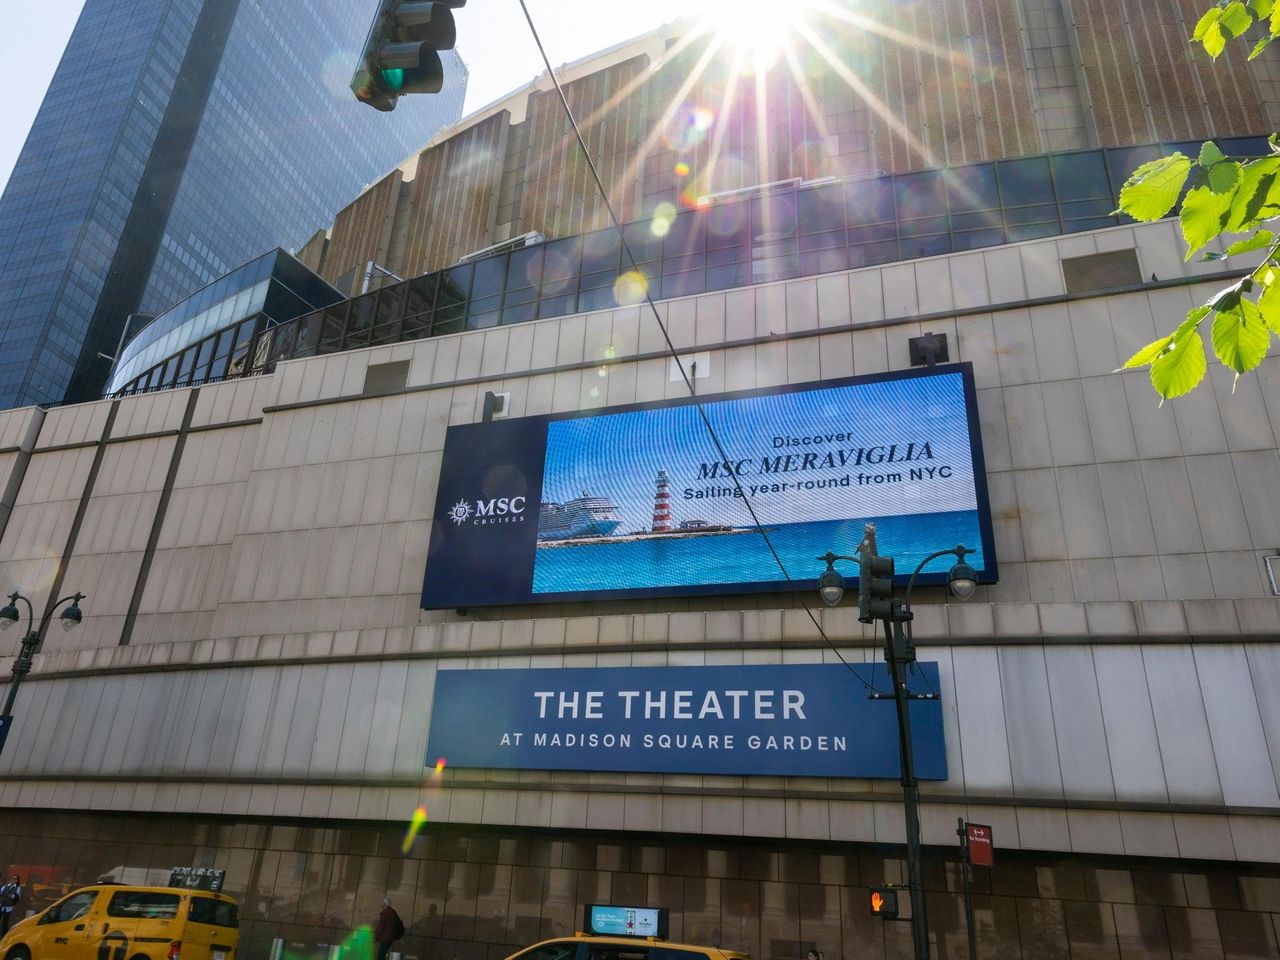 Plan B for Fixing Penn Station Would Wrap Madison Square Garden in